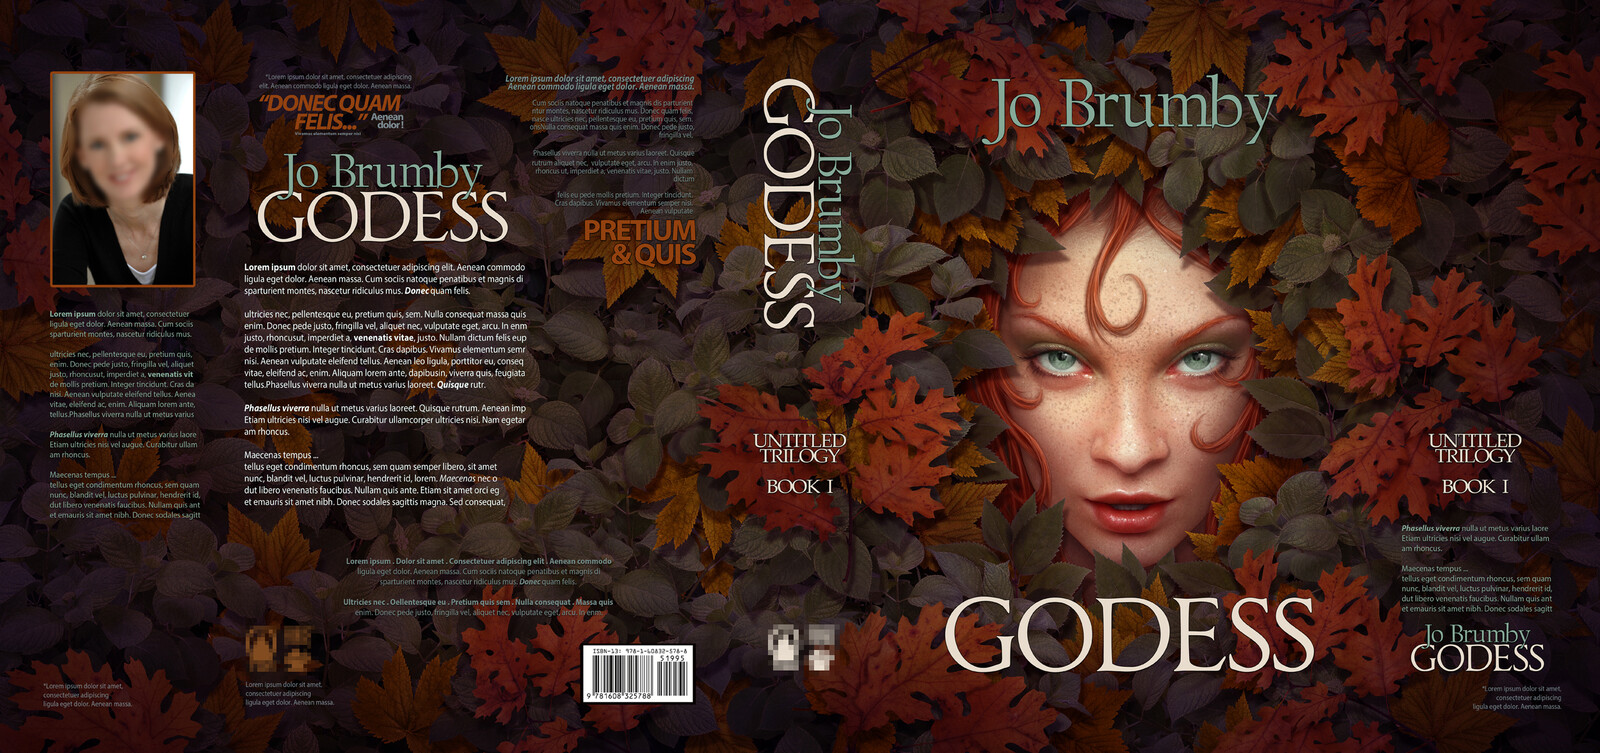 Godess Cover Art  (Fullwrap Cover Layout Mockup)